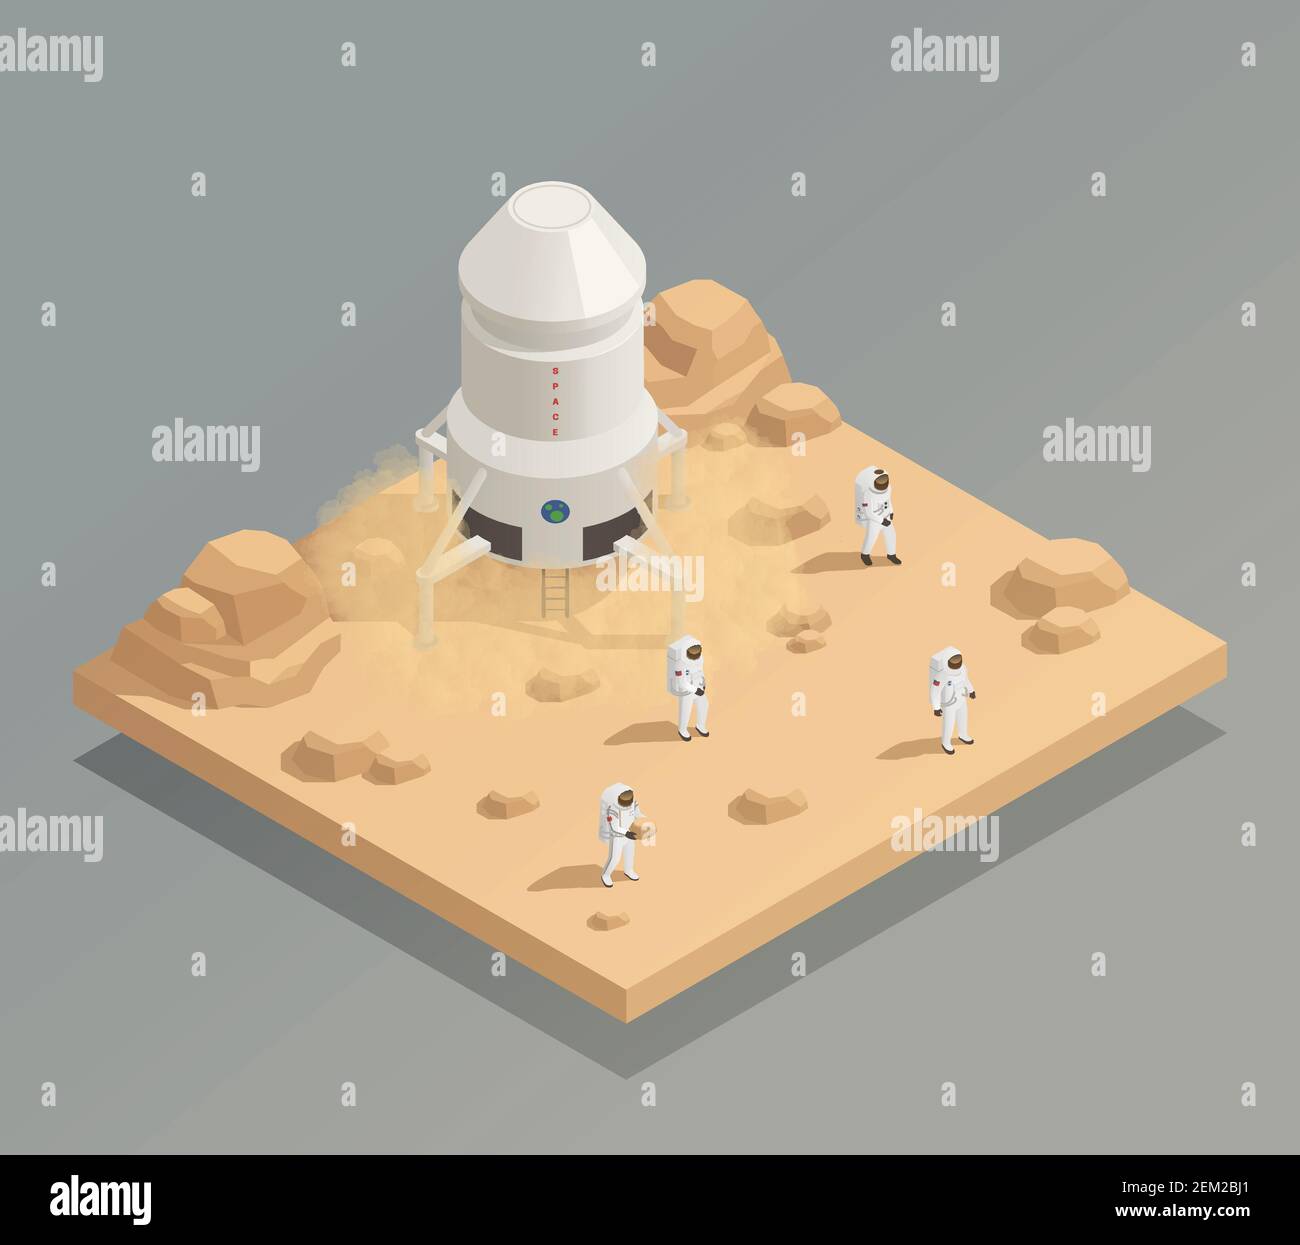 Space exploration mission isometric composition with spacecraft crew astronauts in spacesuits on other planet surface vector illustration Stock Vector